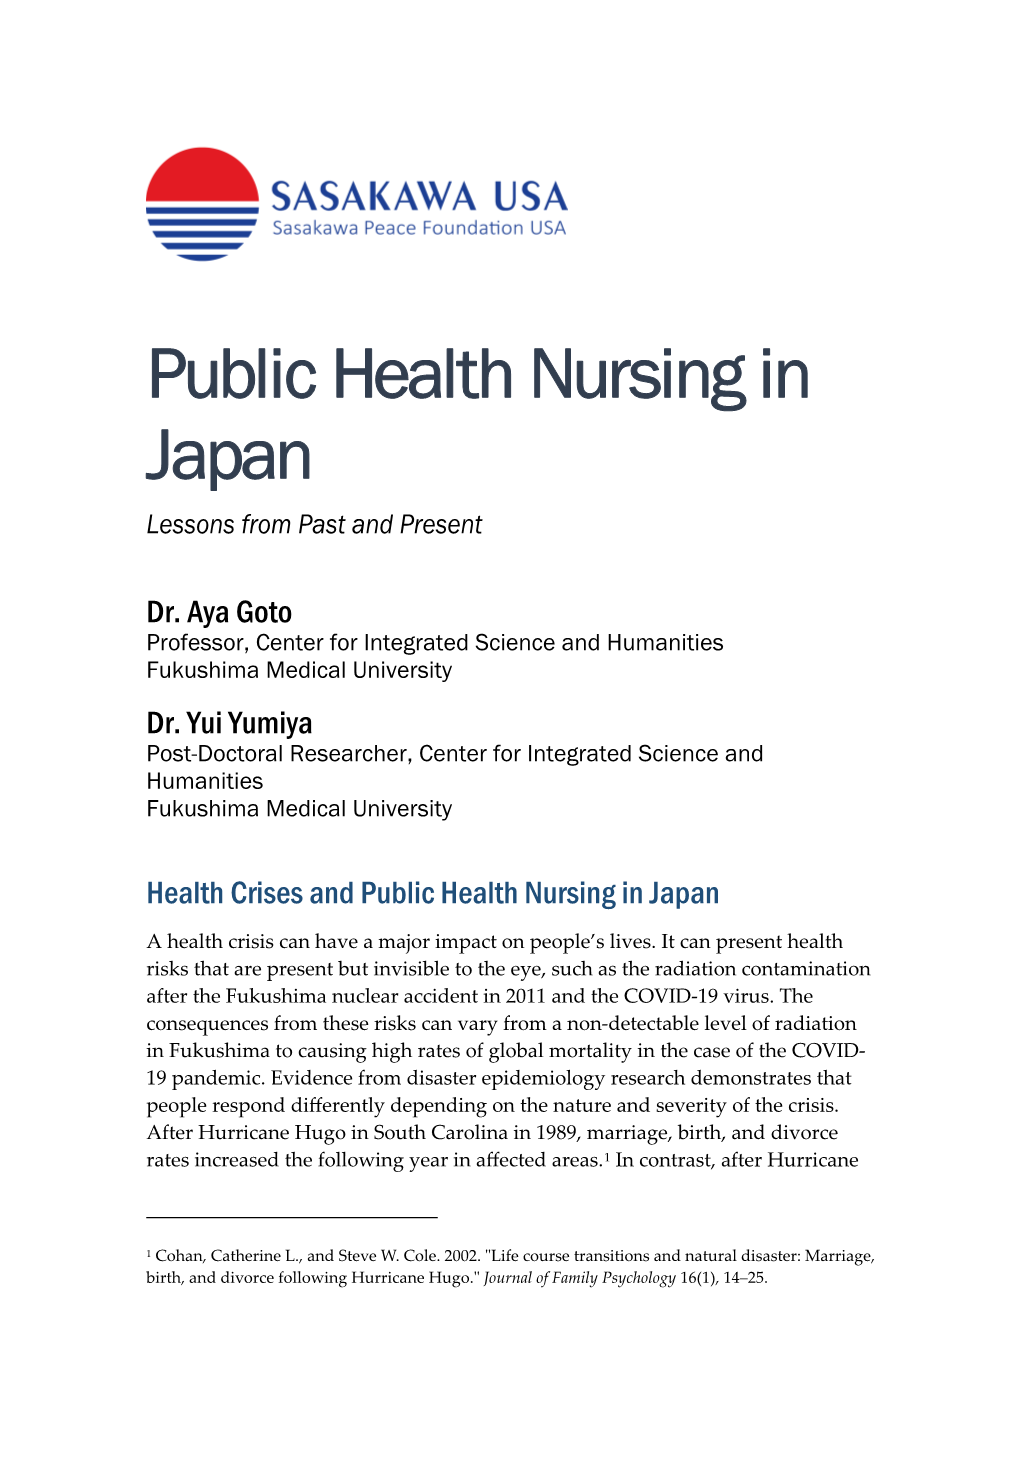 Public Health Nursing in Japan Lessons from Past and Present